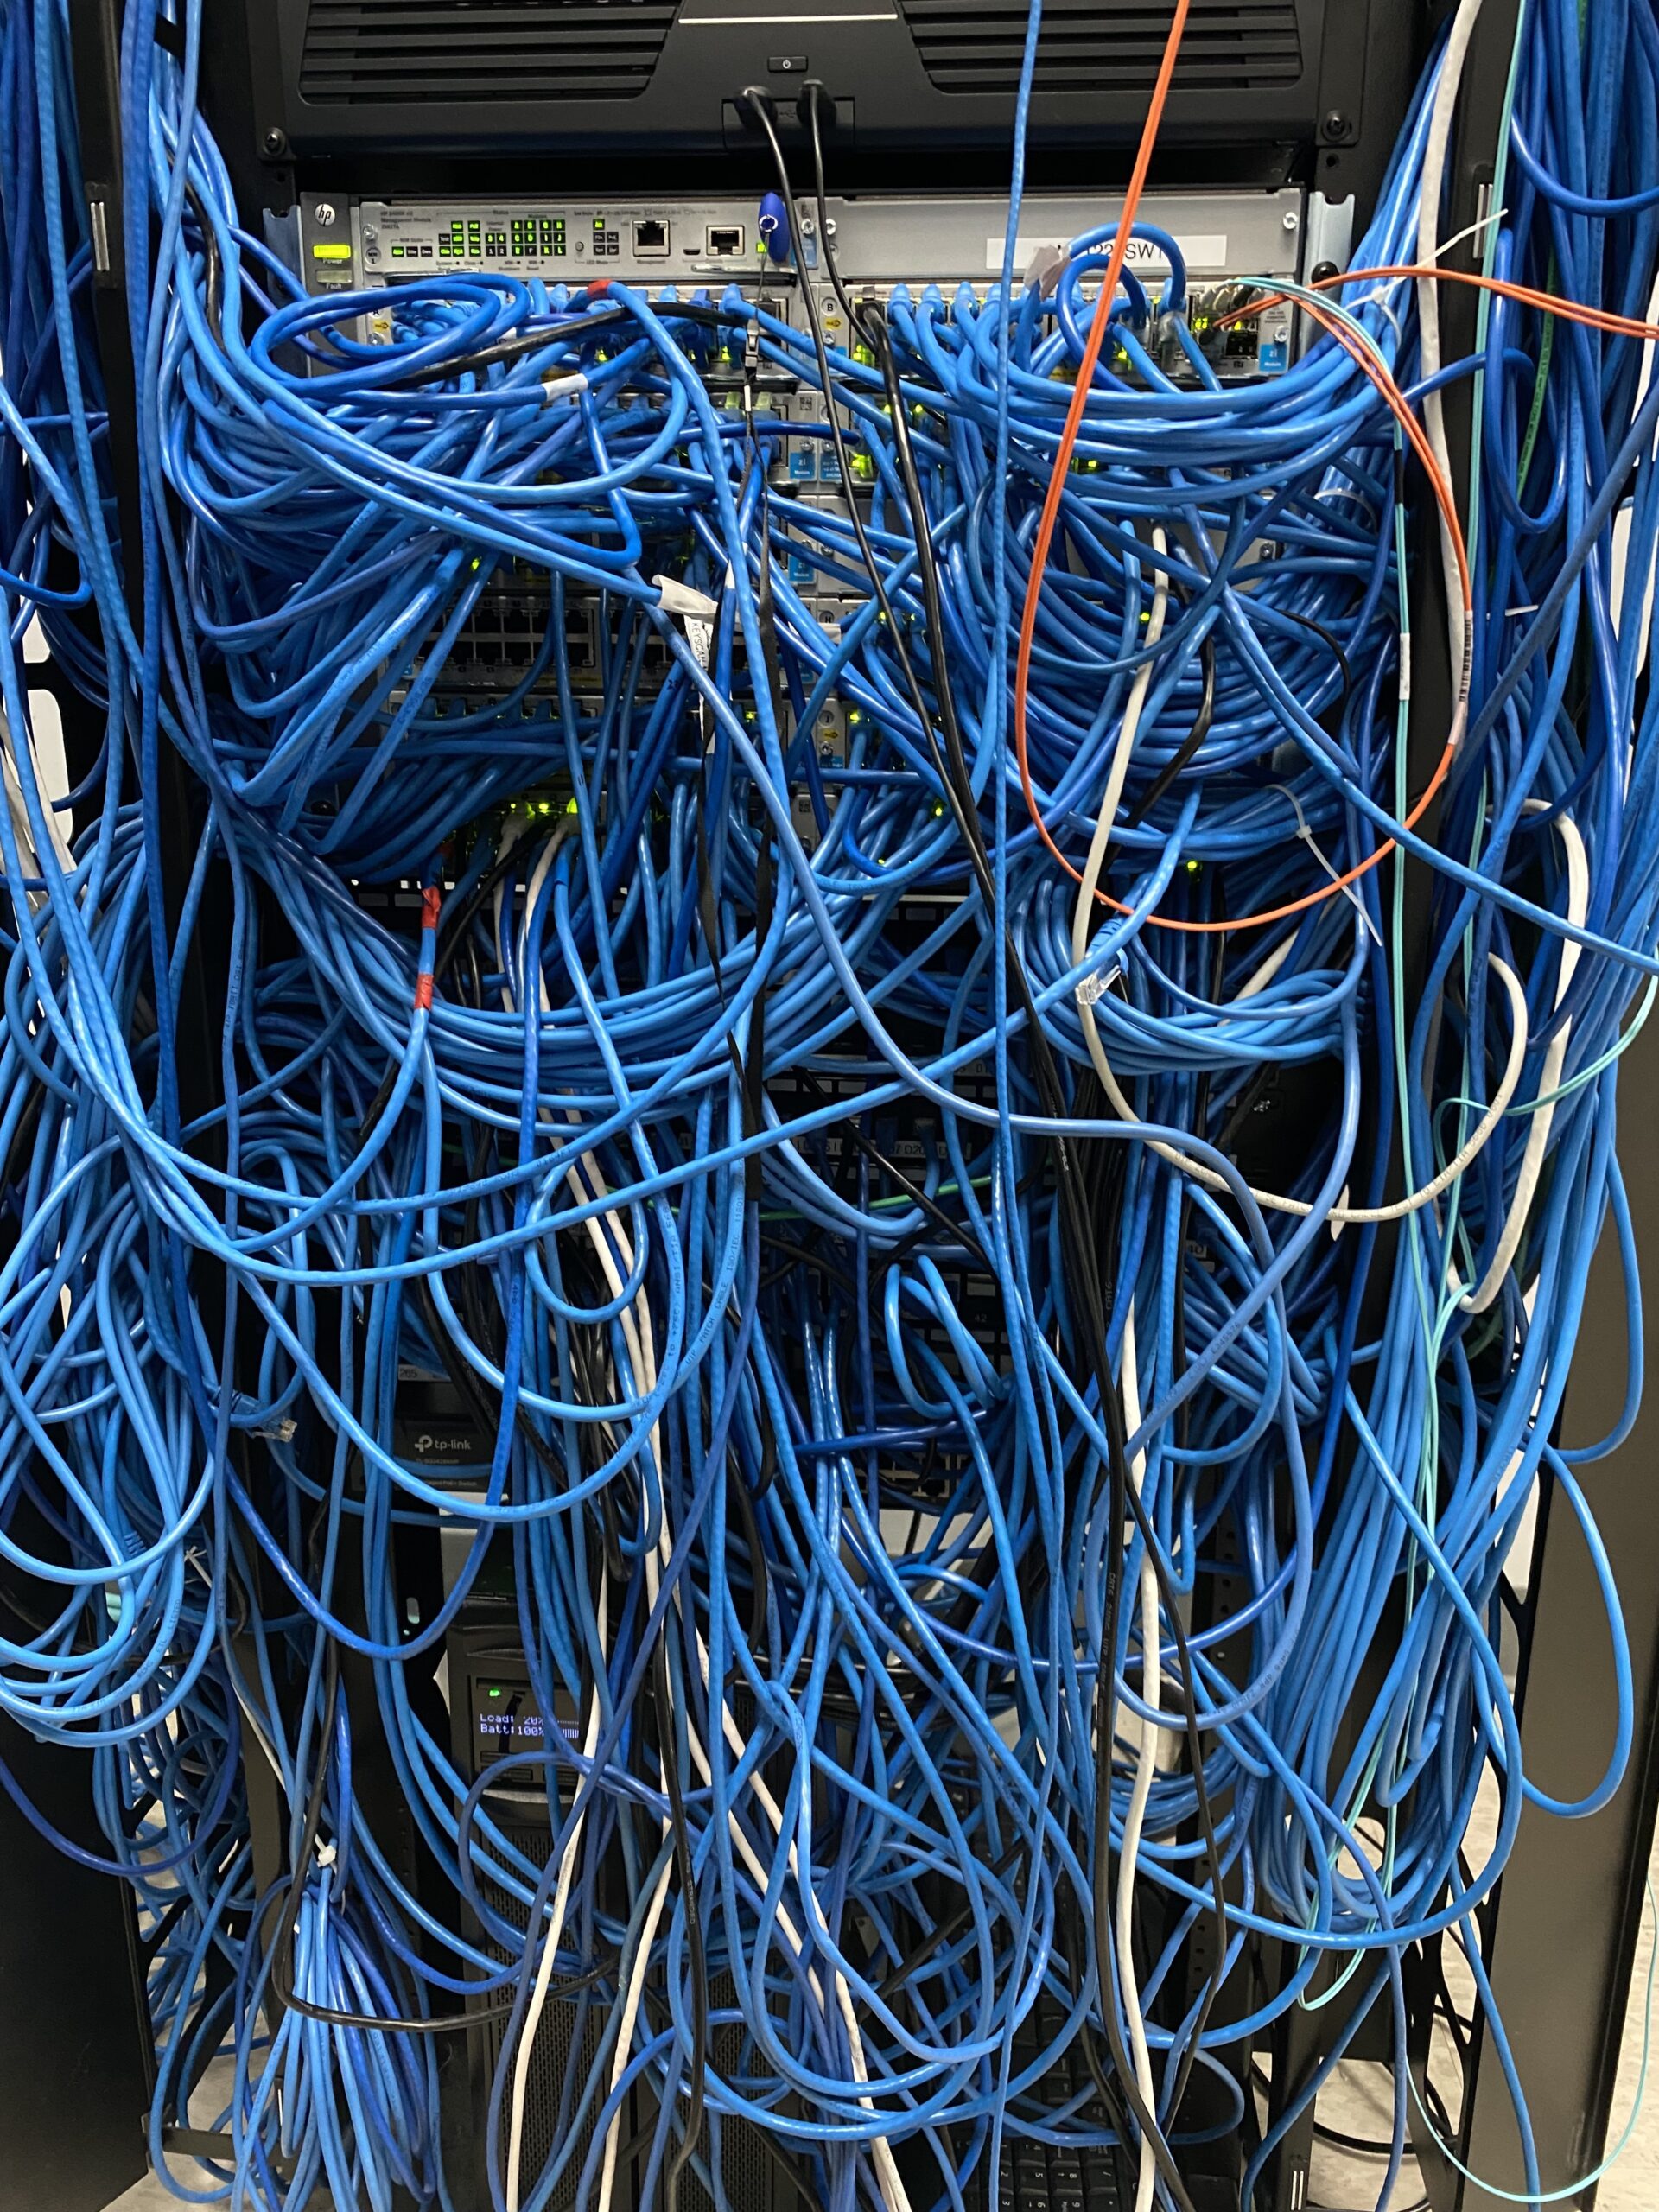 A very messy IT closet in need of structured cabling help.